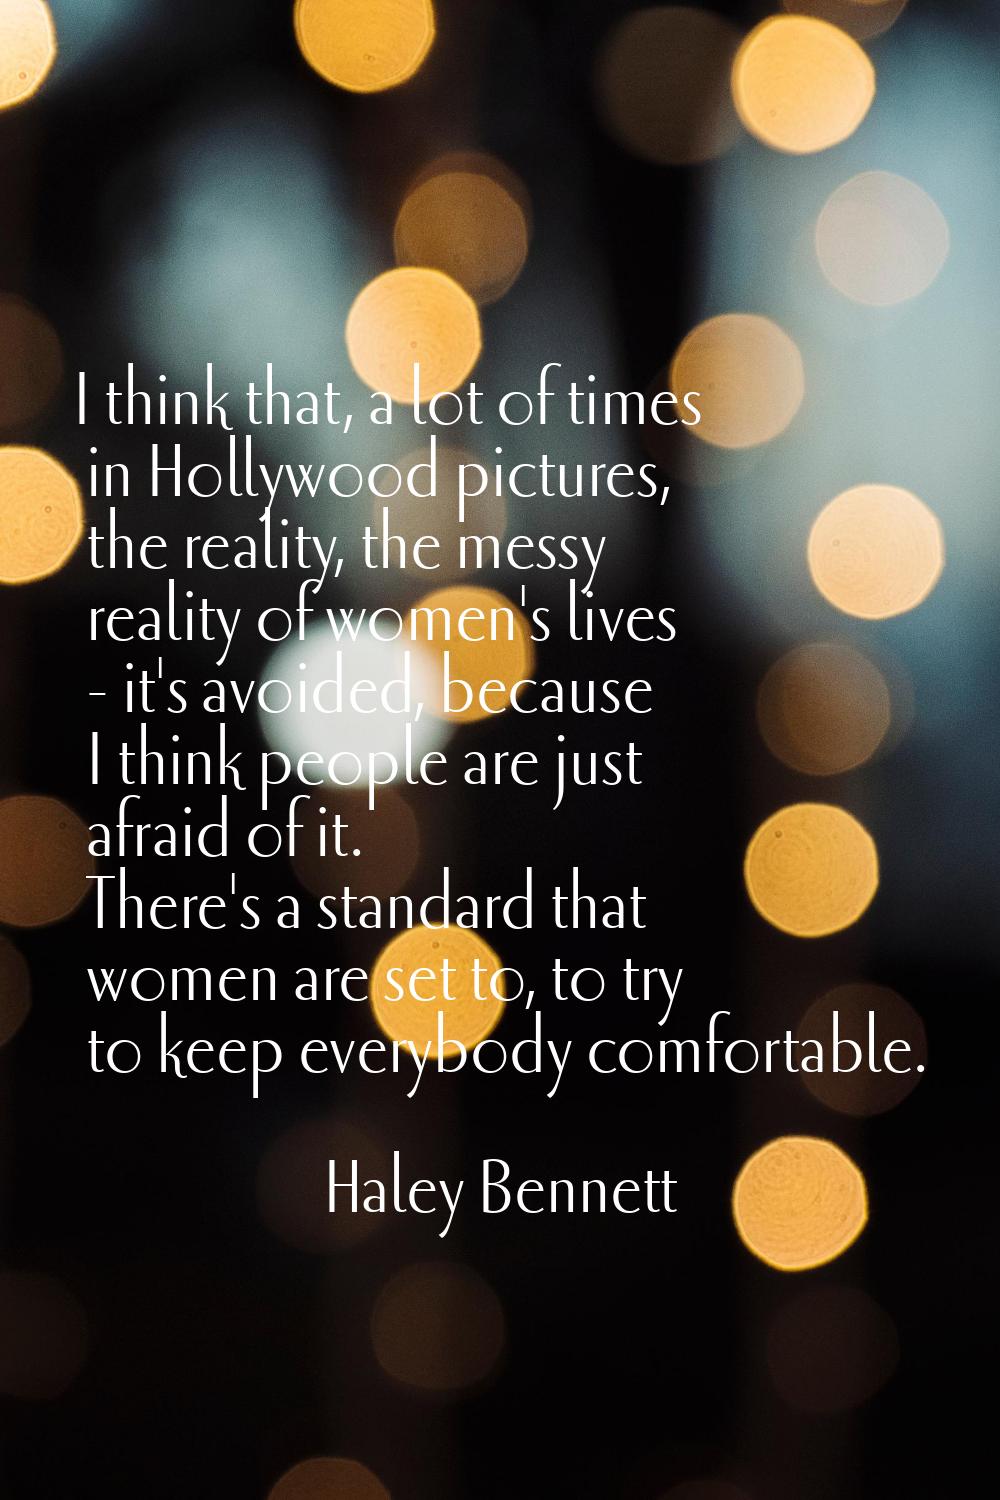 I think that, a lot of times in Hollywood pictures, the reality, the messy reality of women's lives